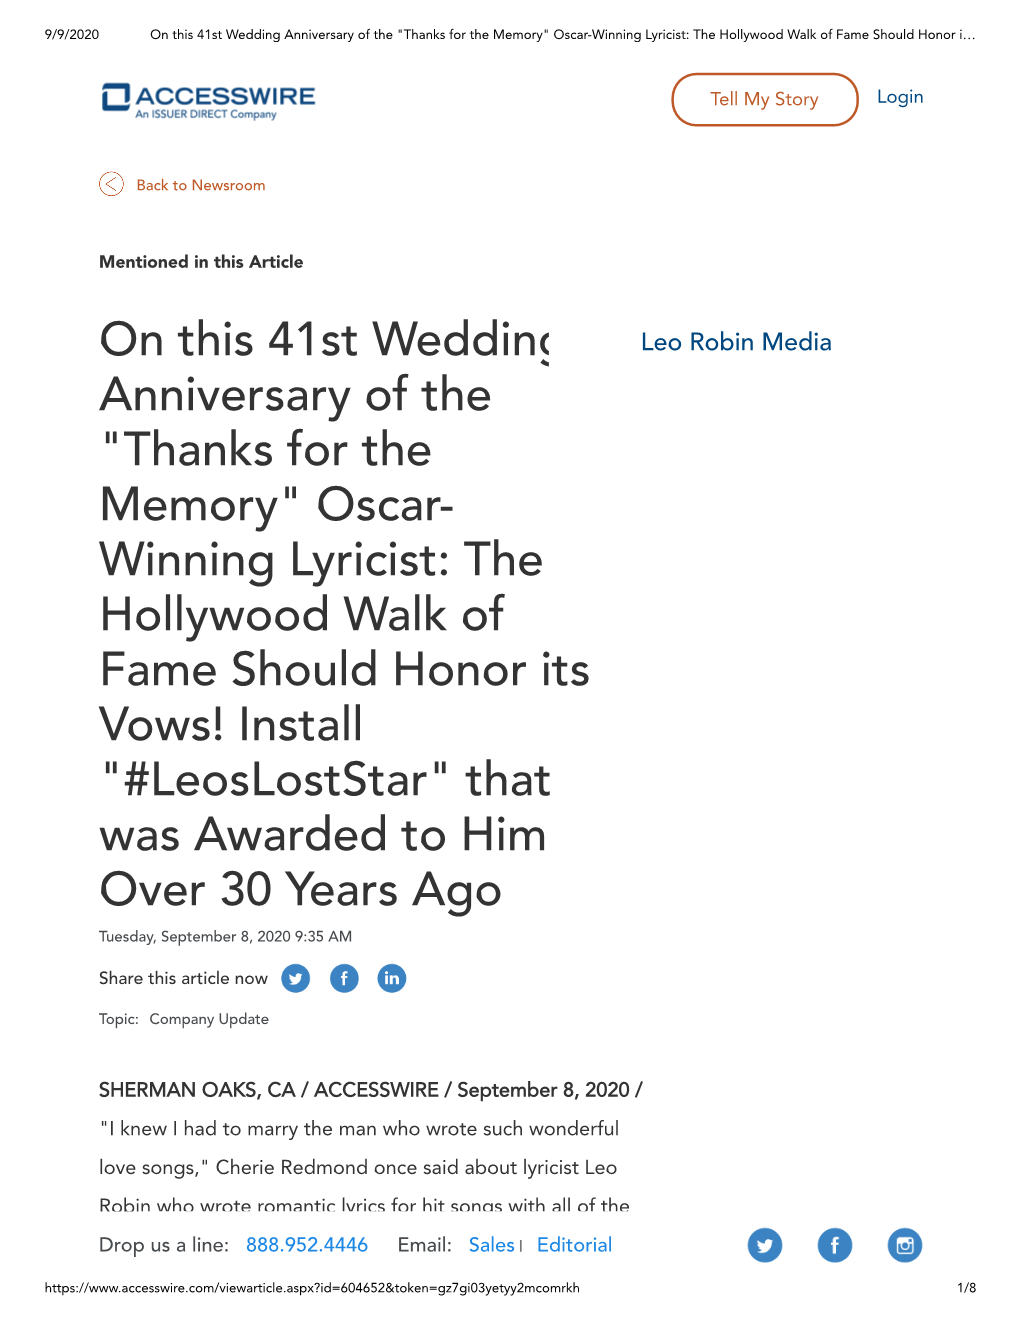 On This 41St Wedding Anniversary of the "Thanks for the Memory" Oscar-Winning Lyricist: the Hollywood Walk of Fame Should Honor I…